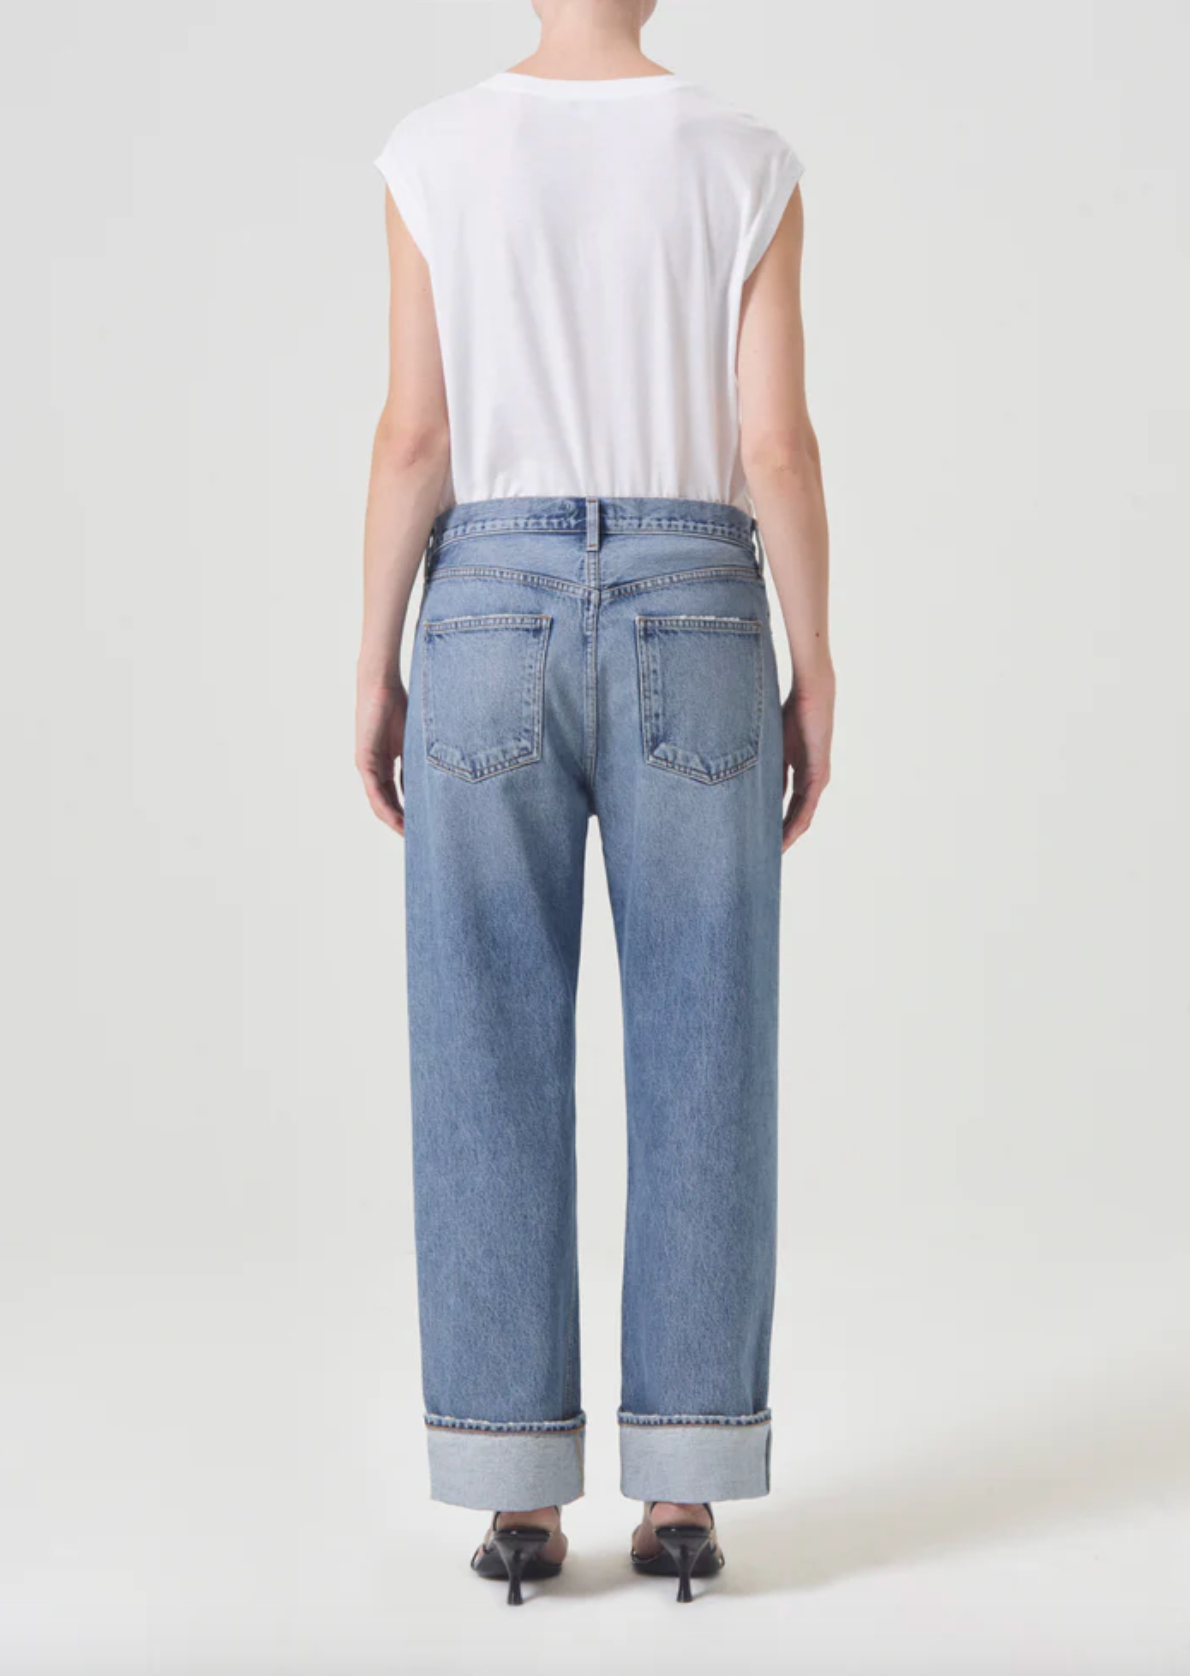 Agolde - Fran Invention Low-Slung Straight Jeans - Image 2 of 6